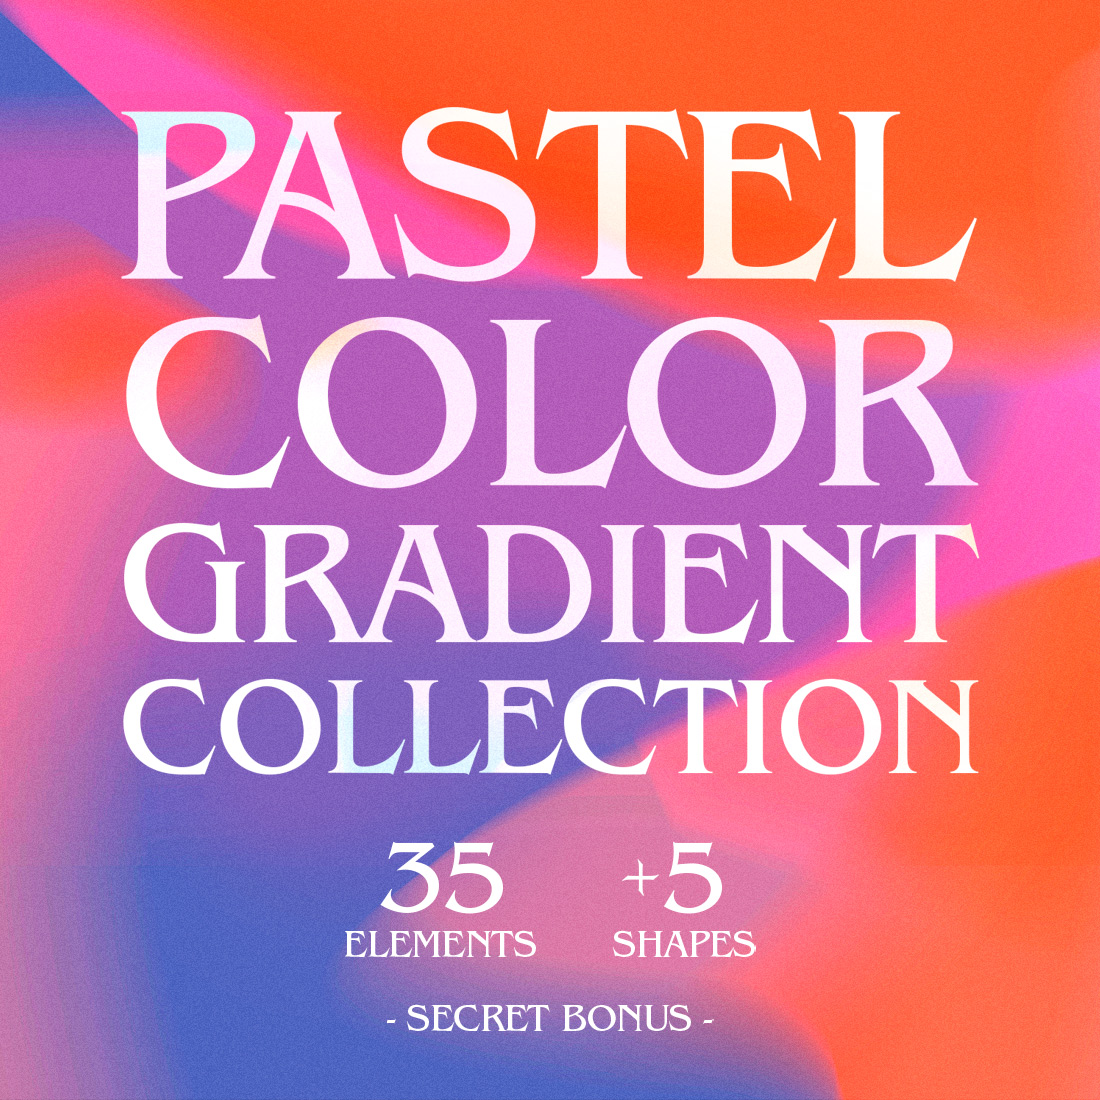 35 Pastel Color Gradients Collection cover image.